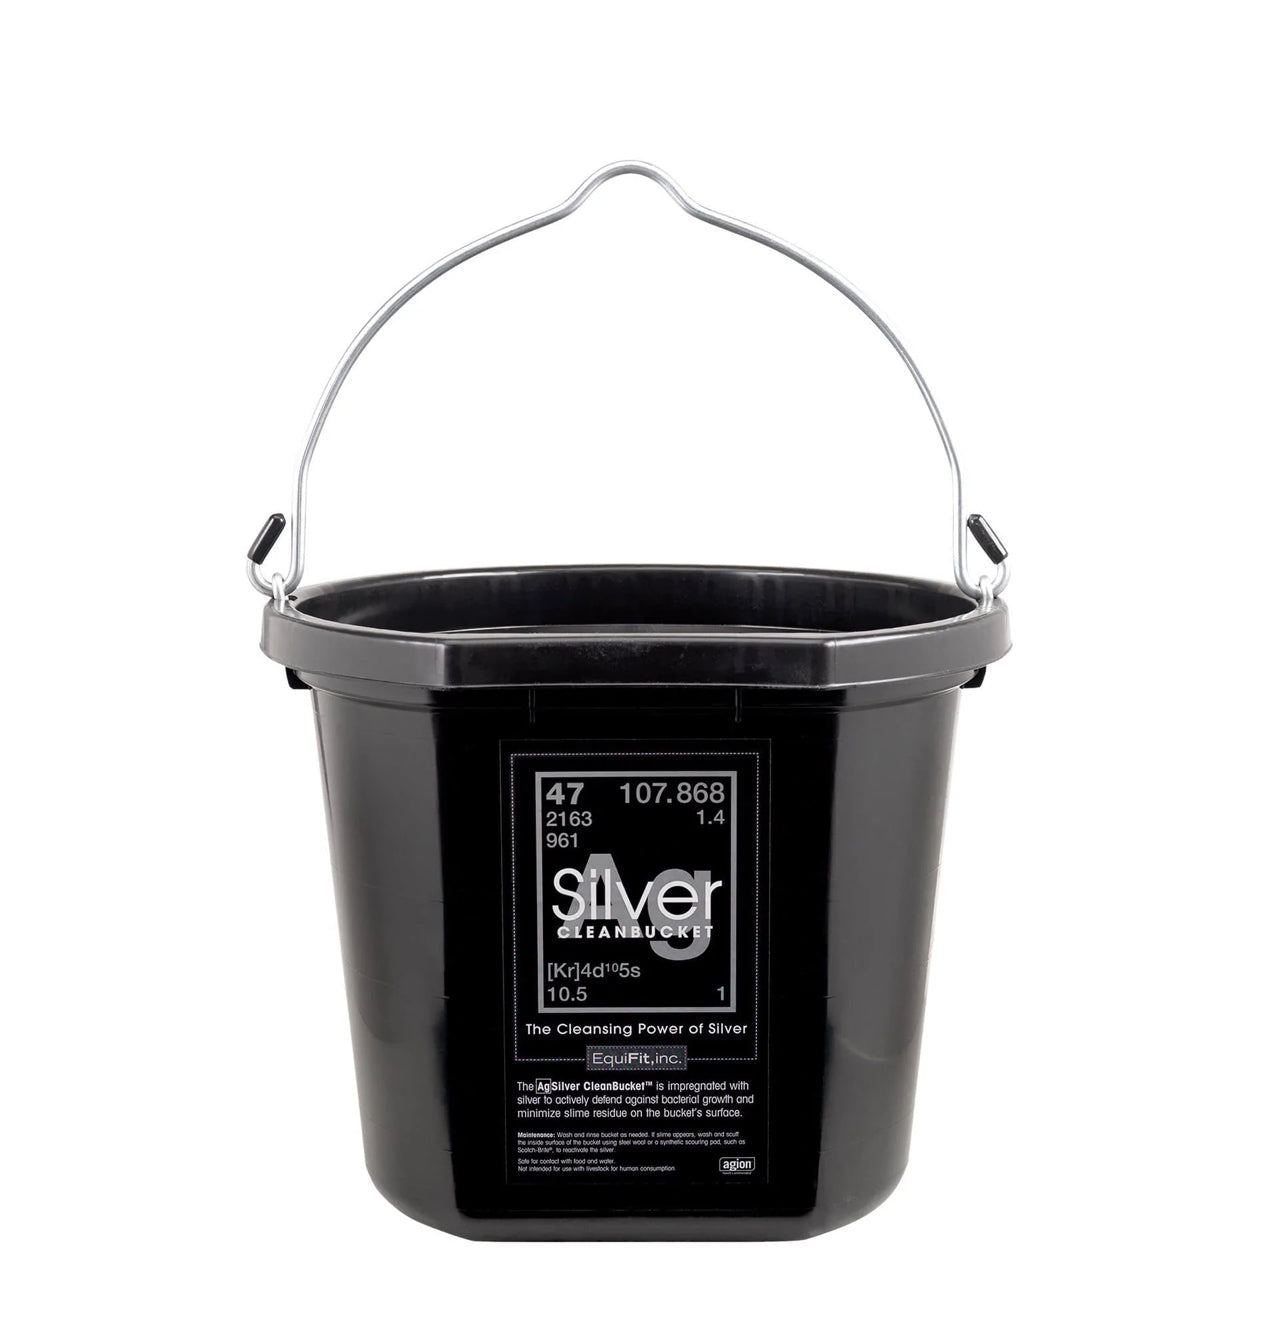 EquiFit AgSilver CleanBucket